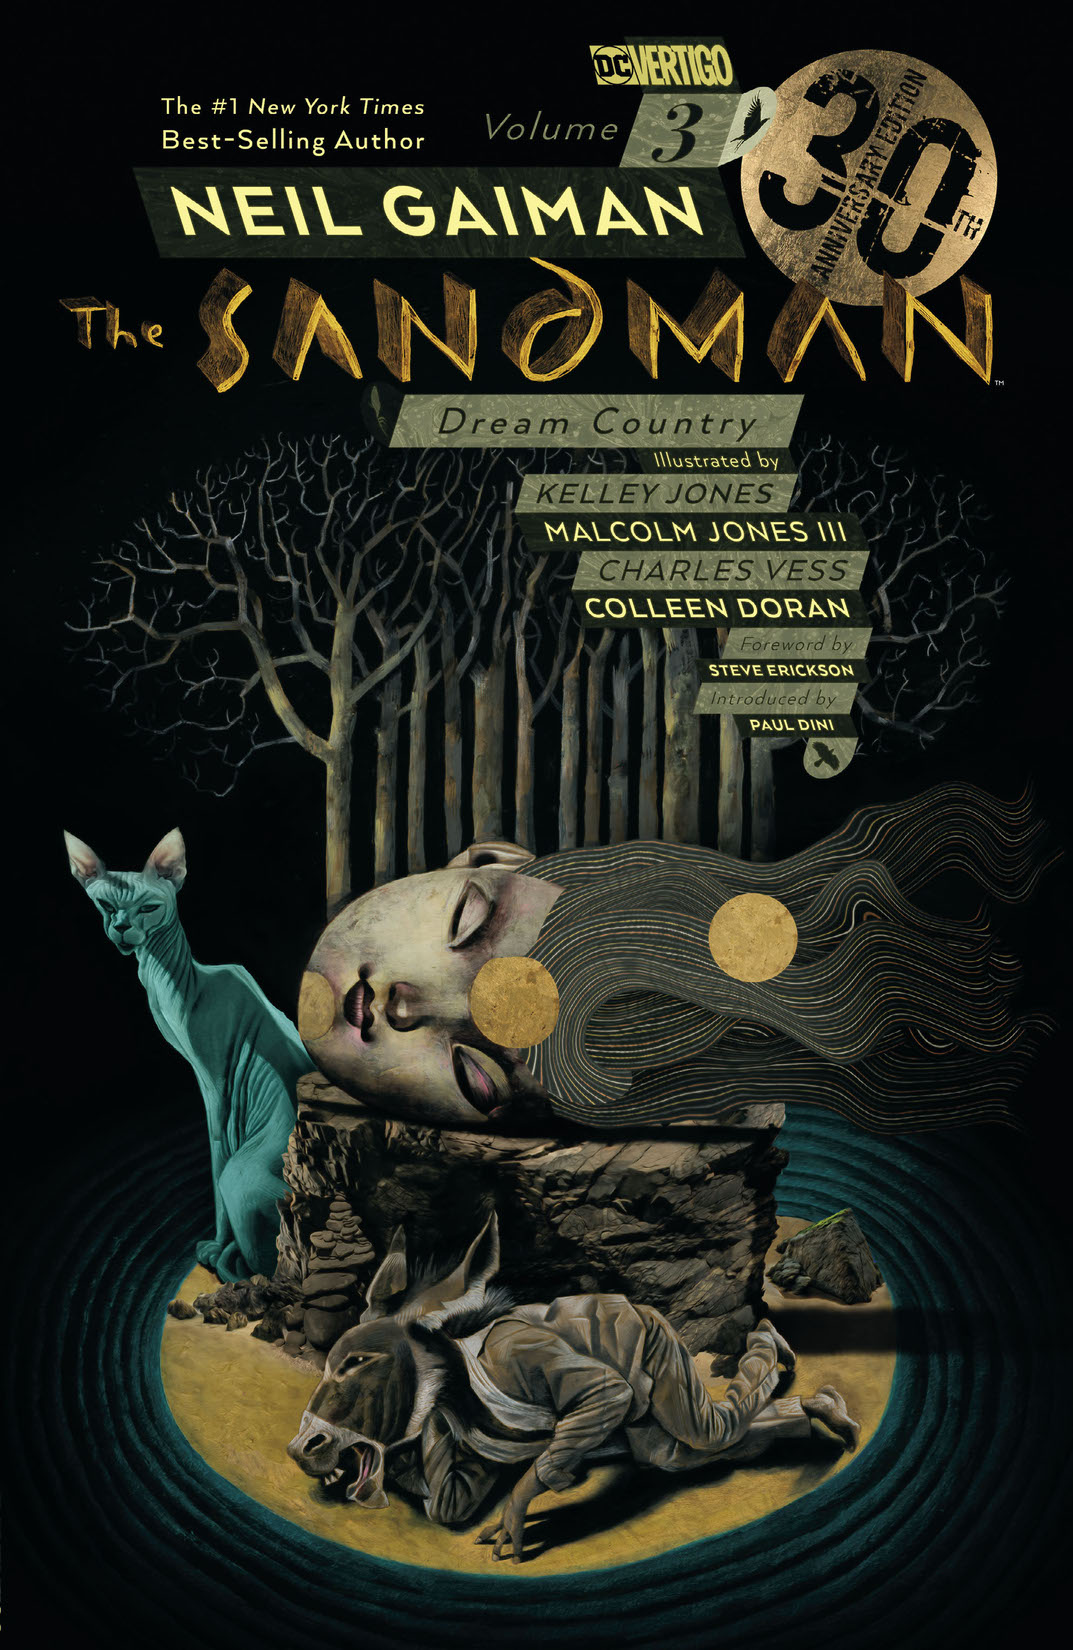 Sandman Vol. 3: Dream Country 30th Anniversary Edition preview images